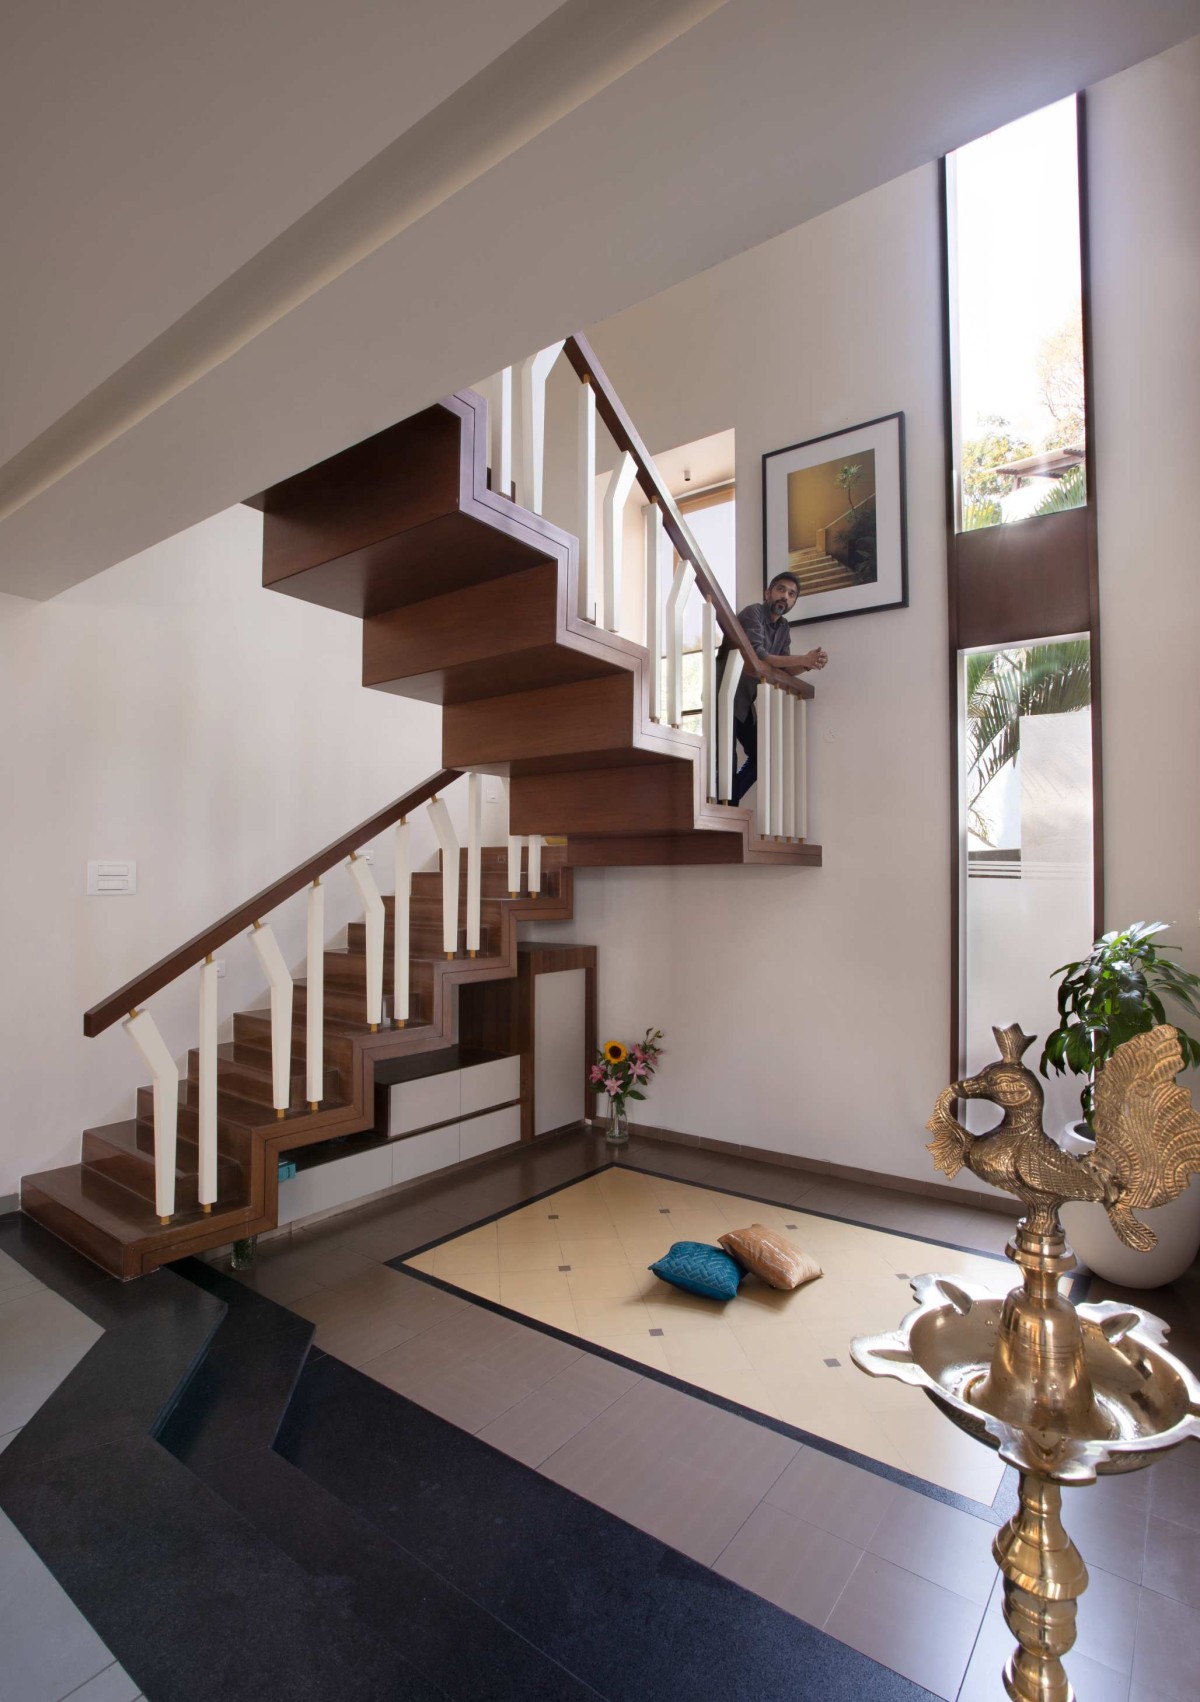 Staircase and Court of Godbole Residence by Chaware & Associates